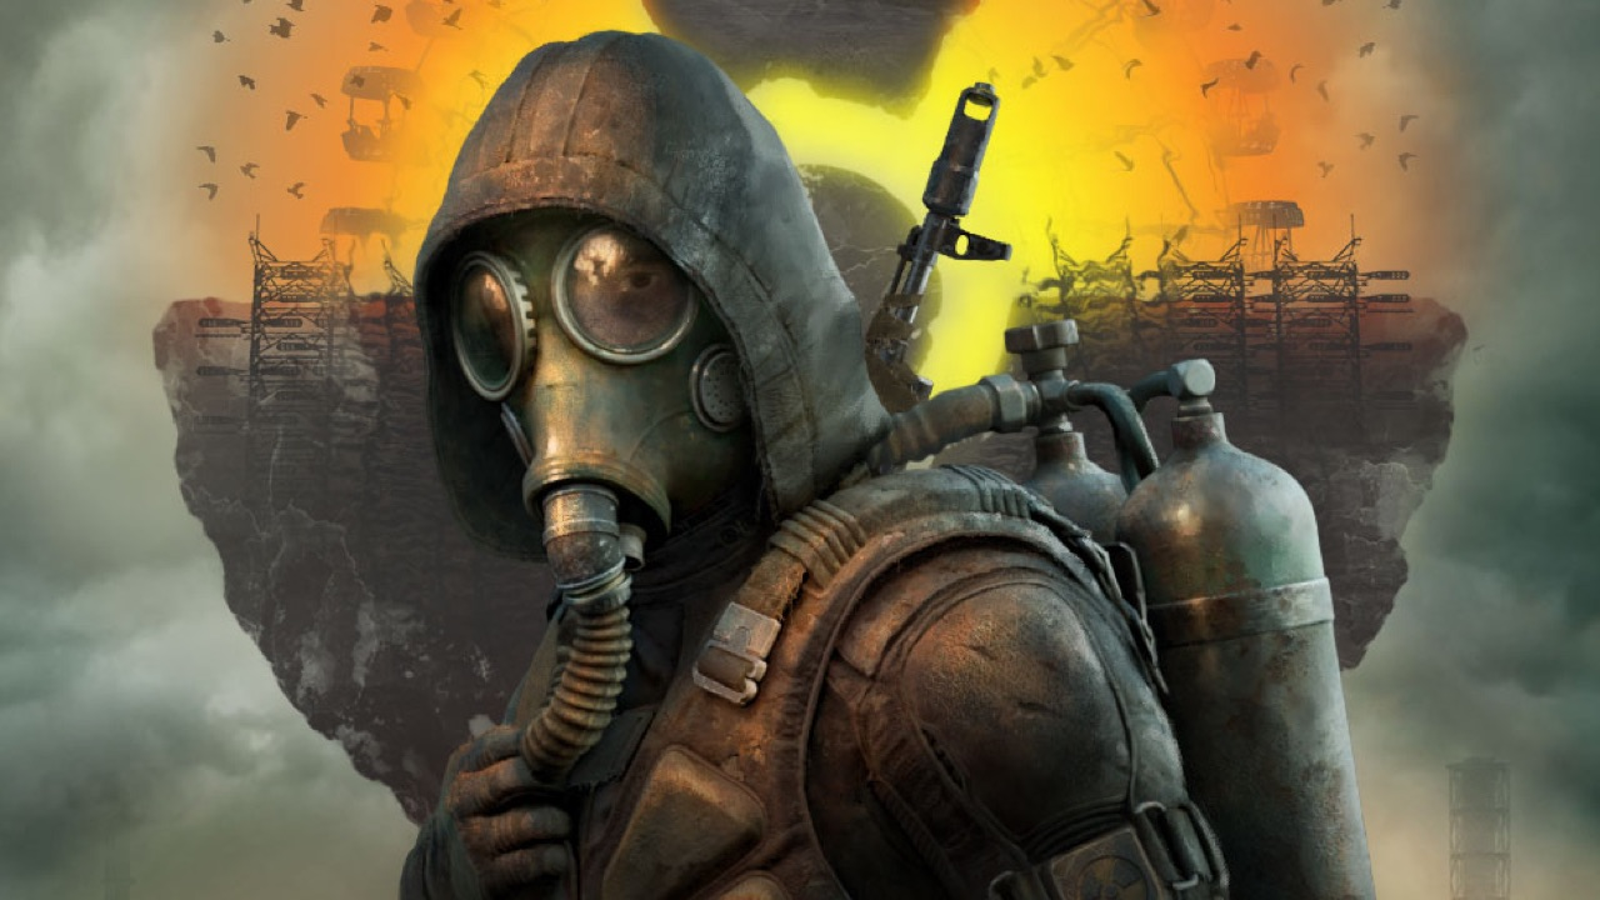 S.T.A.L.K.E.R. 2's irradiated world is dreadfully peaceful, if a